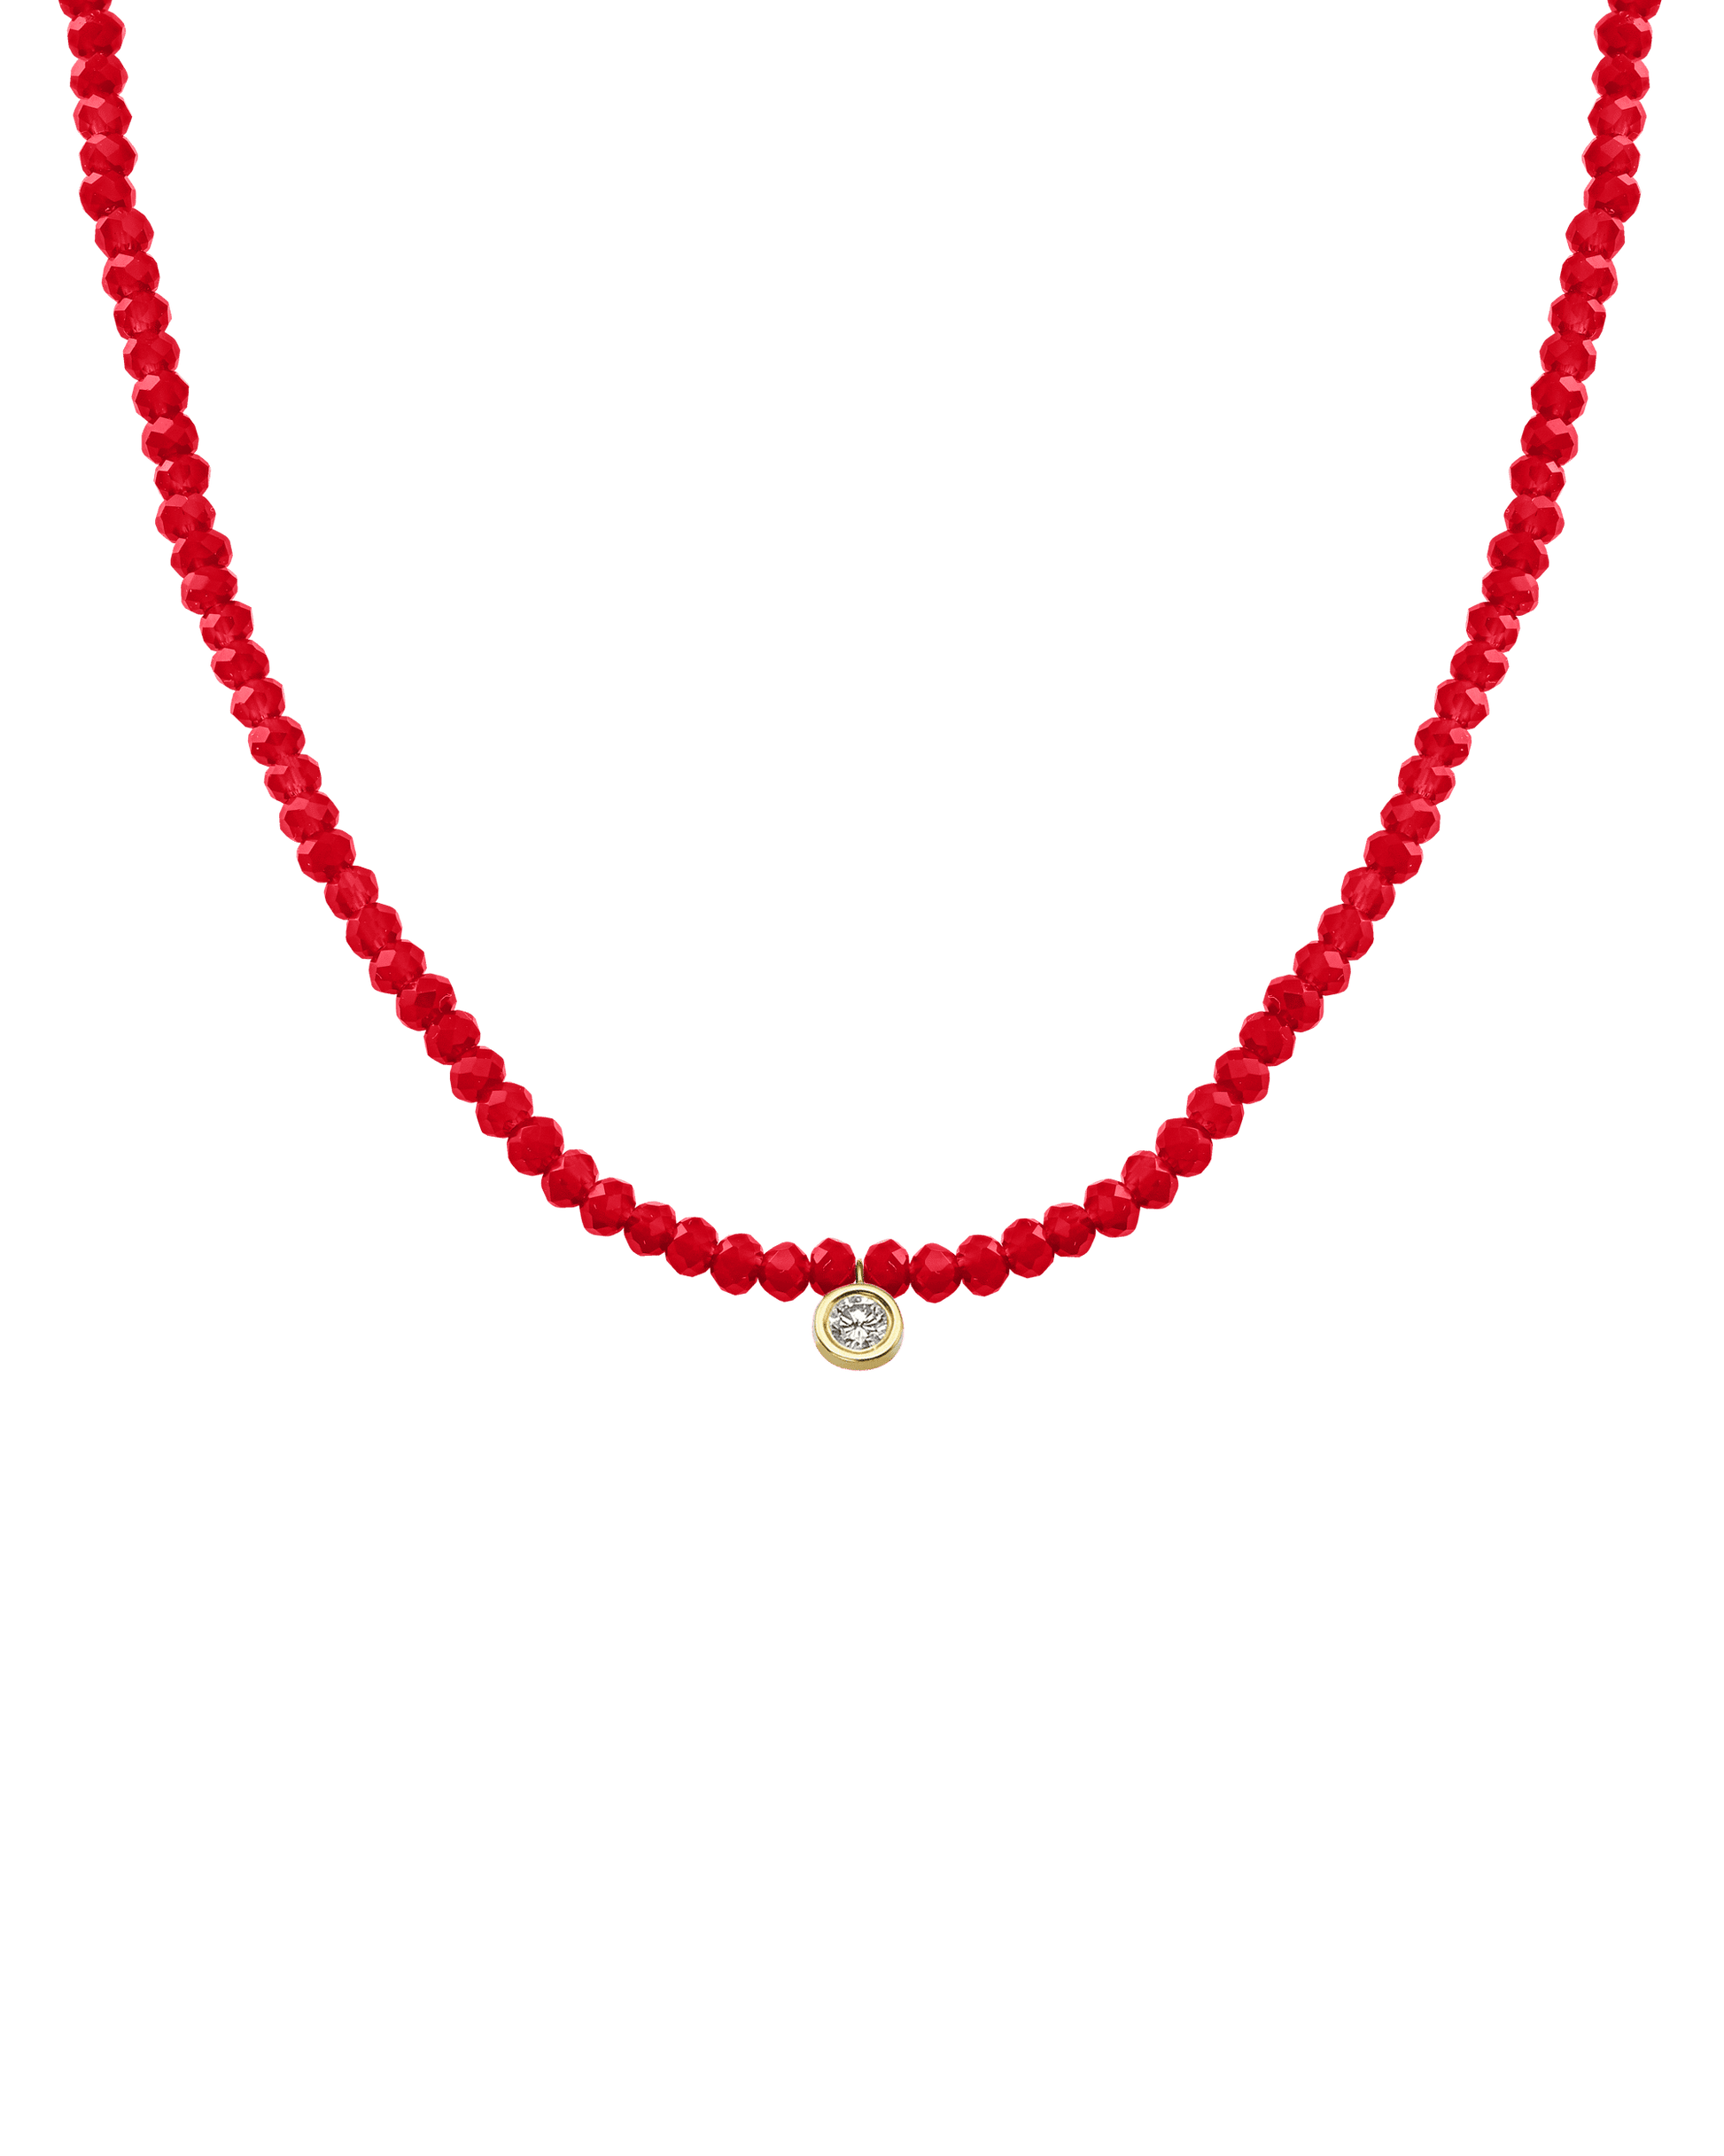 The Gemstone & Diamond Necklace - 14K Yellow Gold Necklaces 14K Solid Gold Natural Red Jade Large: 0.1ct 14"